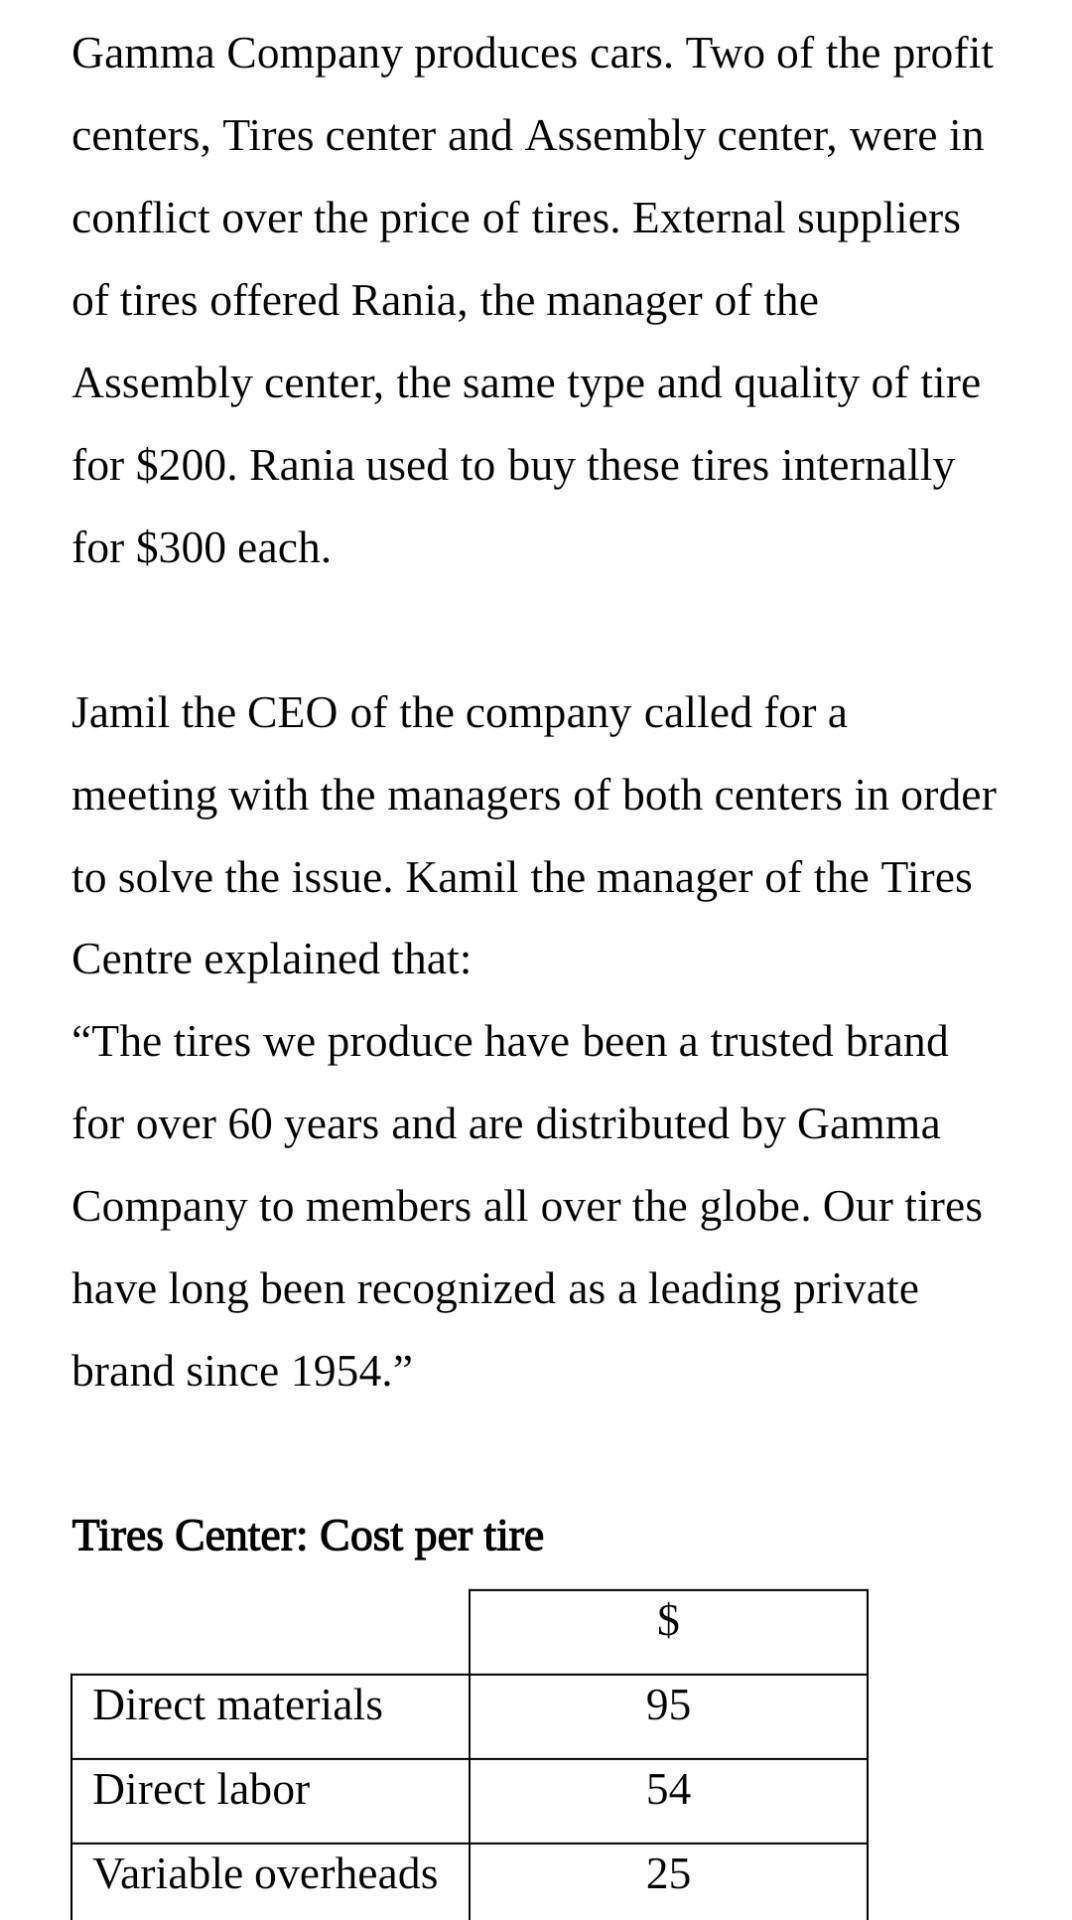 Gamma Company produces cars. Two of the profitcenters, Tires center and Assembly center, were inconflict over the price of